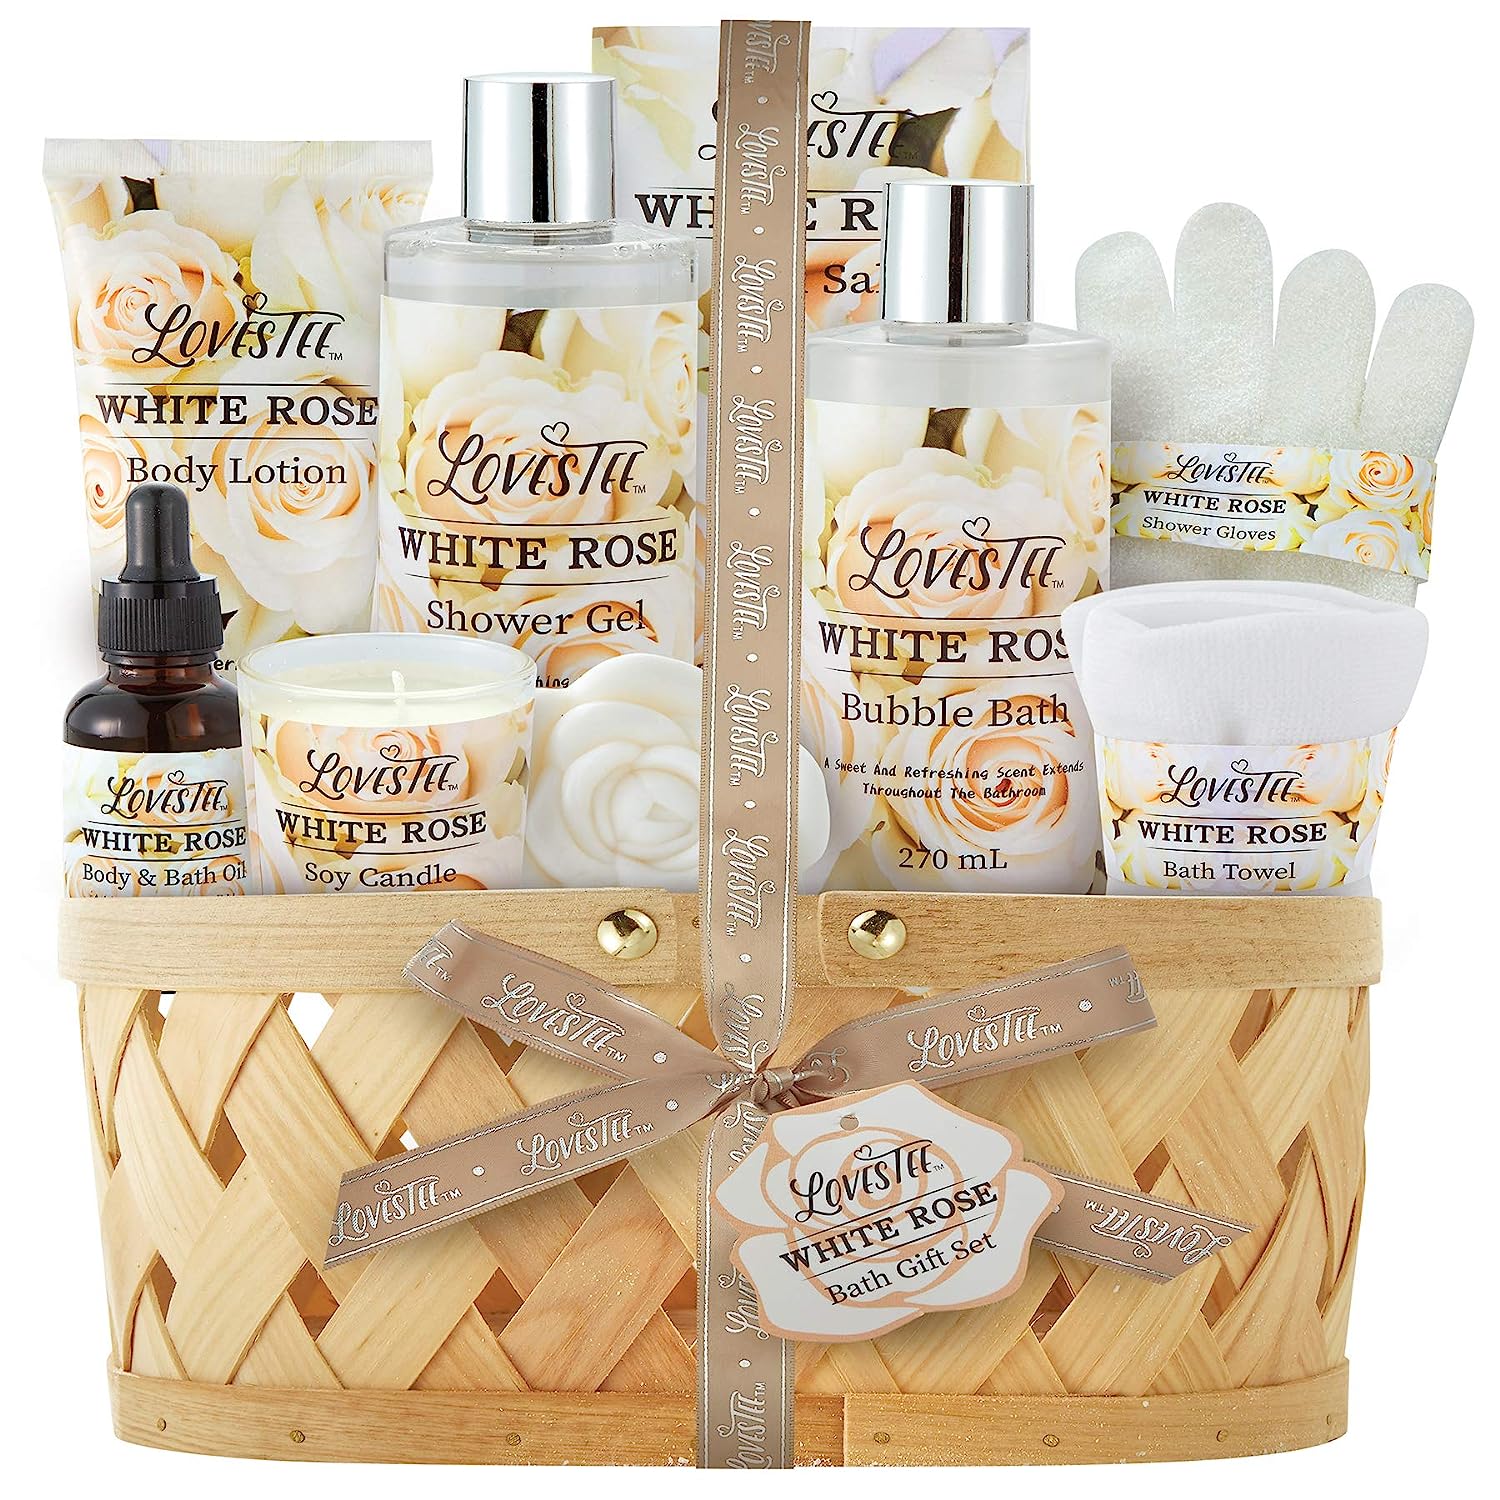 Bath & Body Spa Gift Basket for Women, Best Gift for Christmas, Mother’s Day & Birthday, White Rose Set Includes Body Lotion, Shower Gel, Bubble Bath, Bath Salt, Towel, Soap, Oil, Candle, Gloves